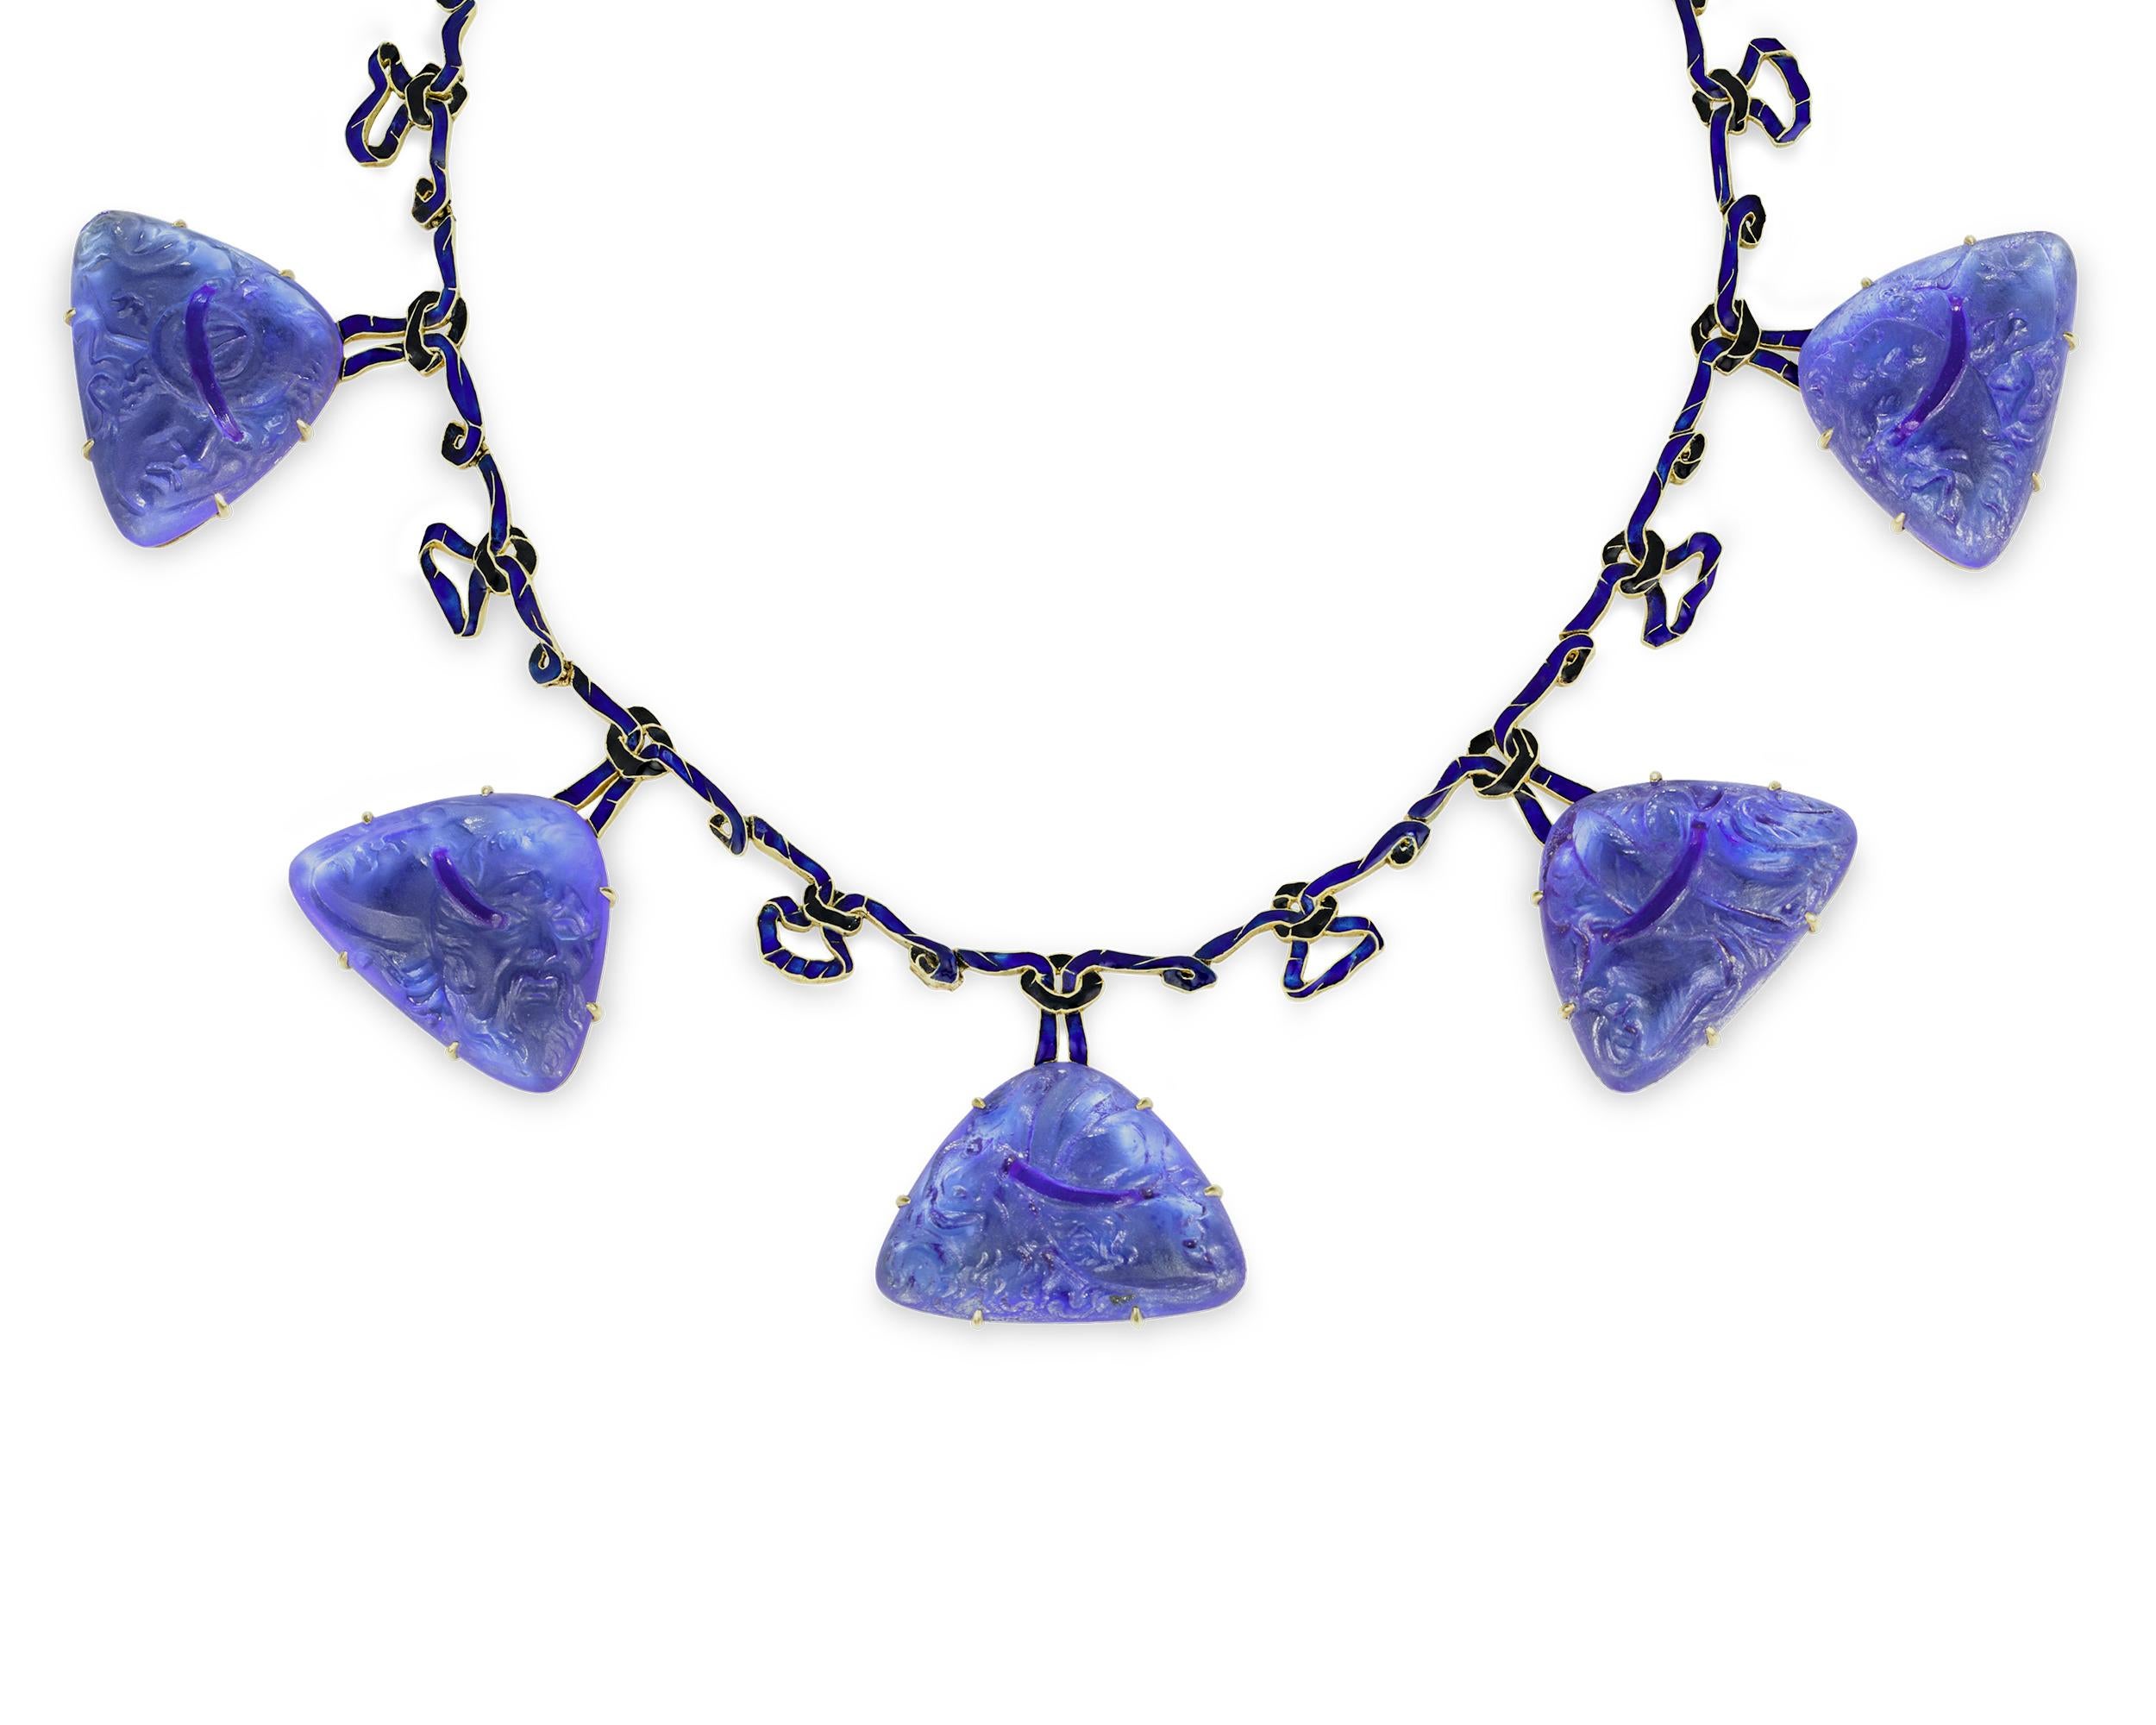 A masterclass in Art Nouveau jewelry design, this stunning glass and enamel necklace is the work of the legendary designer René Lalique. Pendants made of eye-catching cobalt blue glass line the entire length of the necklace. Each displays a